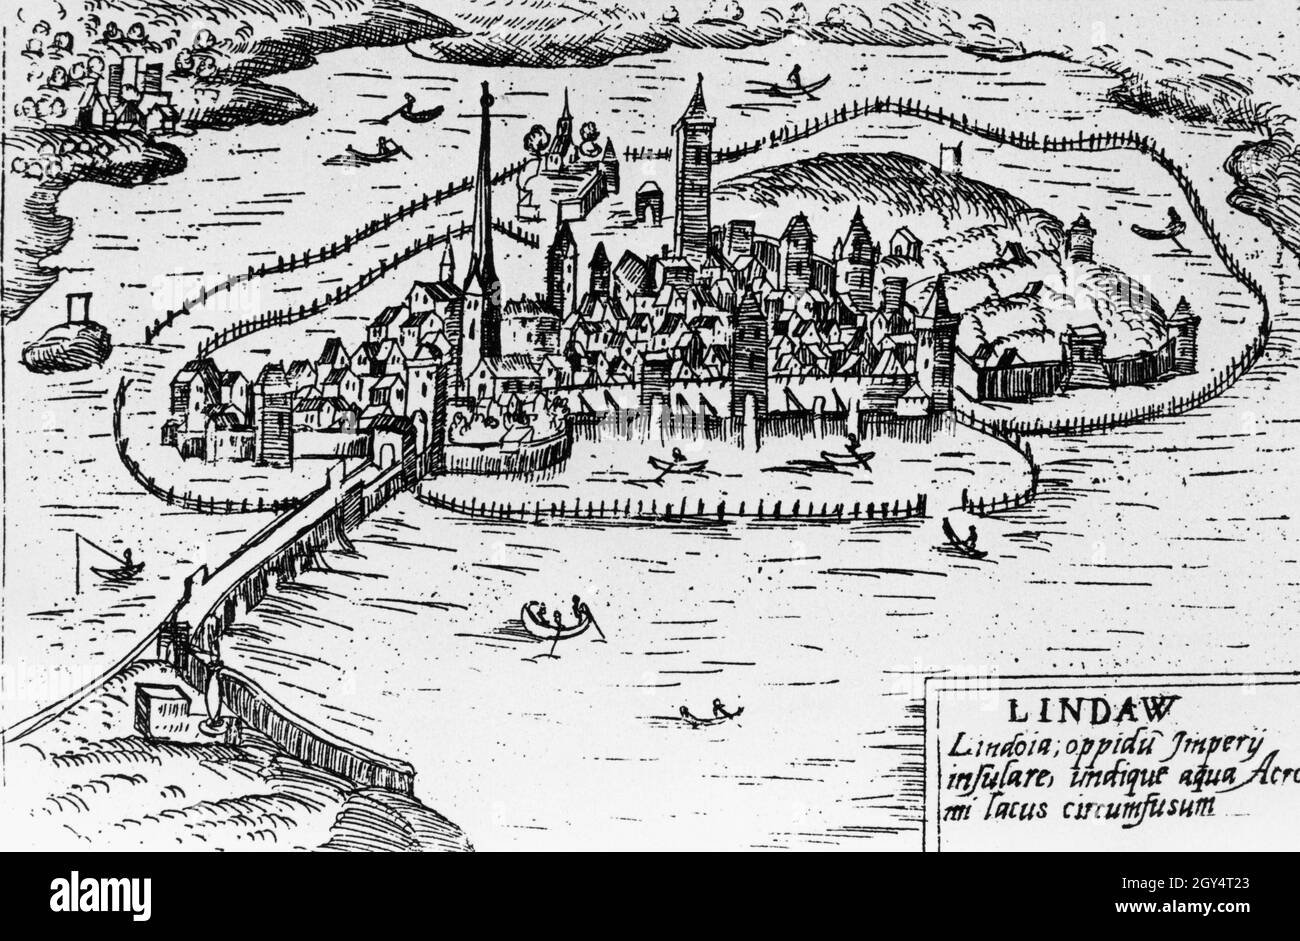 'This drawing after an etching by Francesco Valegio shows Lindau in Lake Constance around the year 1600. The island is connected to the mainland by a bridge. At the bottom right is written: ''Lindaw / Lindoia, oppidu Impery / insulare, undique aqua Acro / mi lacus circumfusum''. [automated translation]' Stock Photo